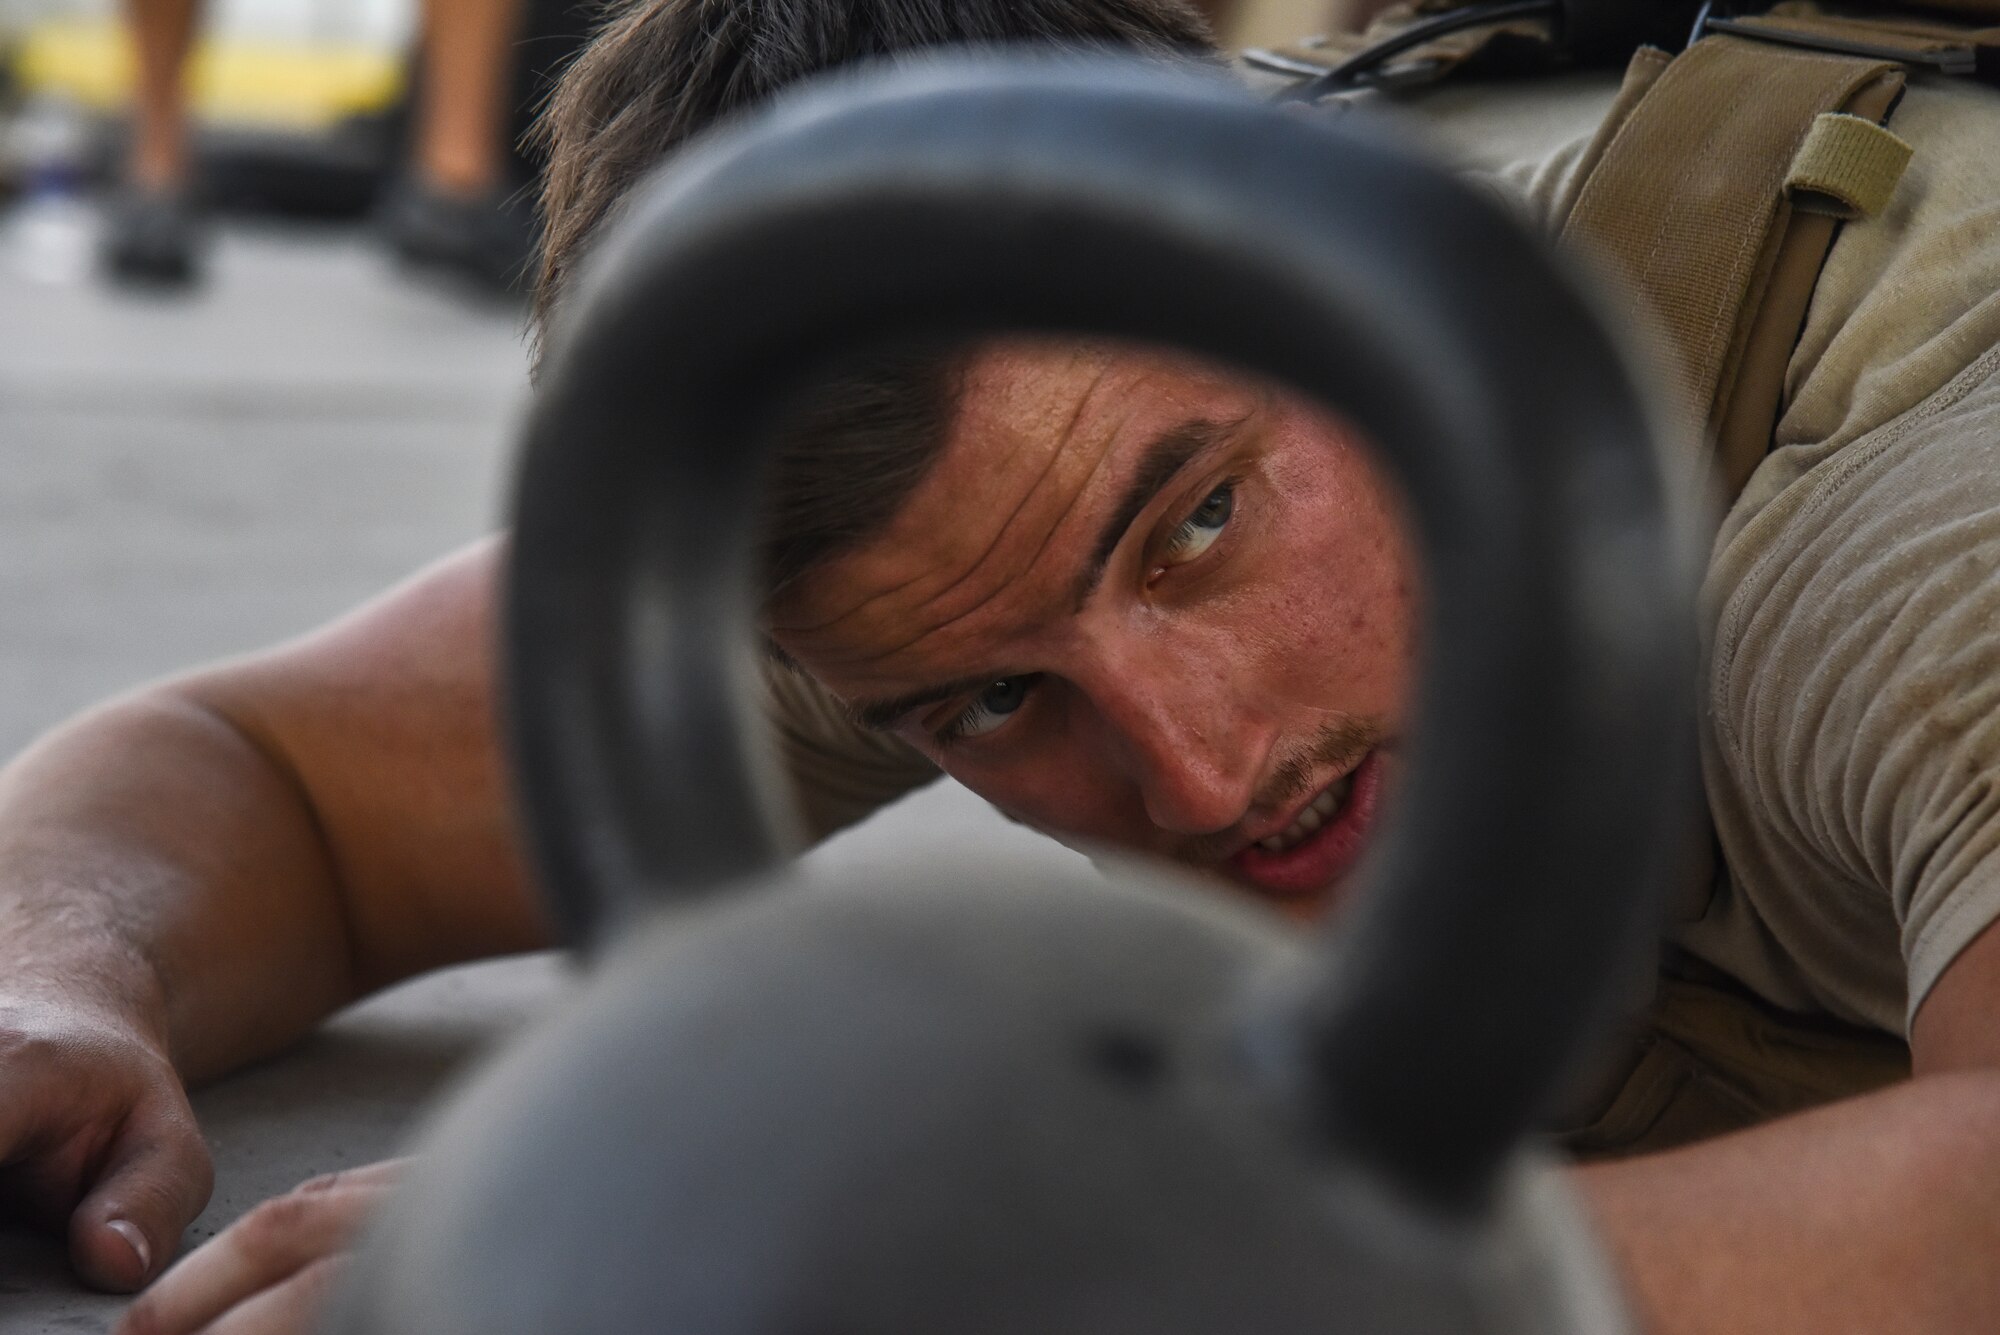 A U.S. Air Force Airman takes a rest during the EOD 134 Memorial Workout at Al Dhafra Air Base, United Arab Emirates, Nov. 30, 2018. 380th Air Expeditionary Wing Airmen, along with coalition partners, participated in the workout to honor the 134 EOD technicians from the U.S. Air Force, Army, Navy and Marine Corps that have been killed since Sept. 11, 2001. (U.S. Air Force photo by Senior Airman Mya M. Crosby)